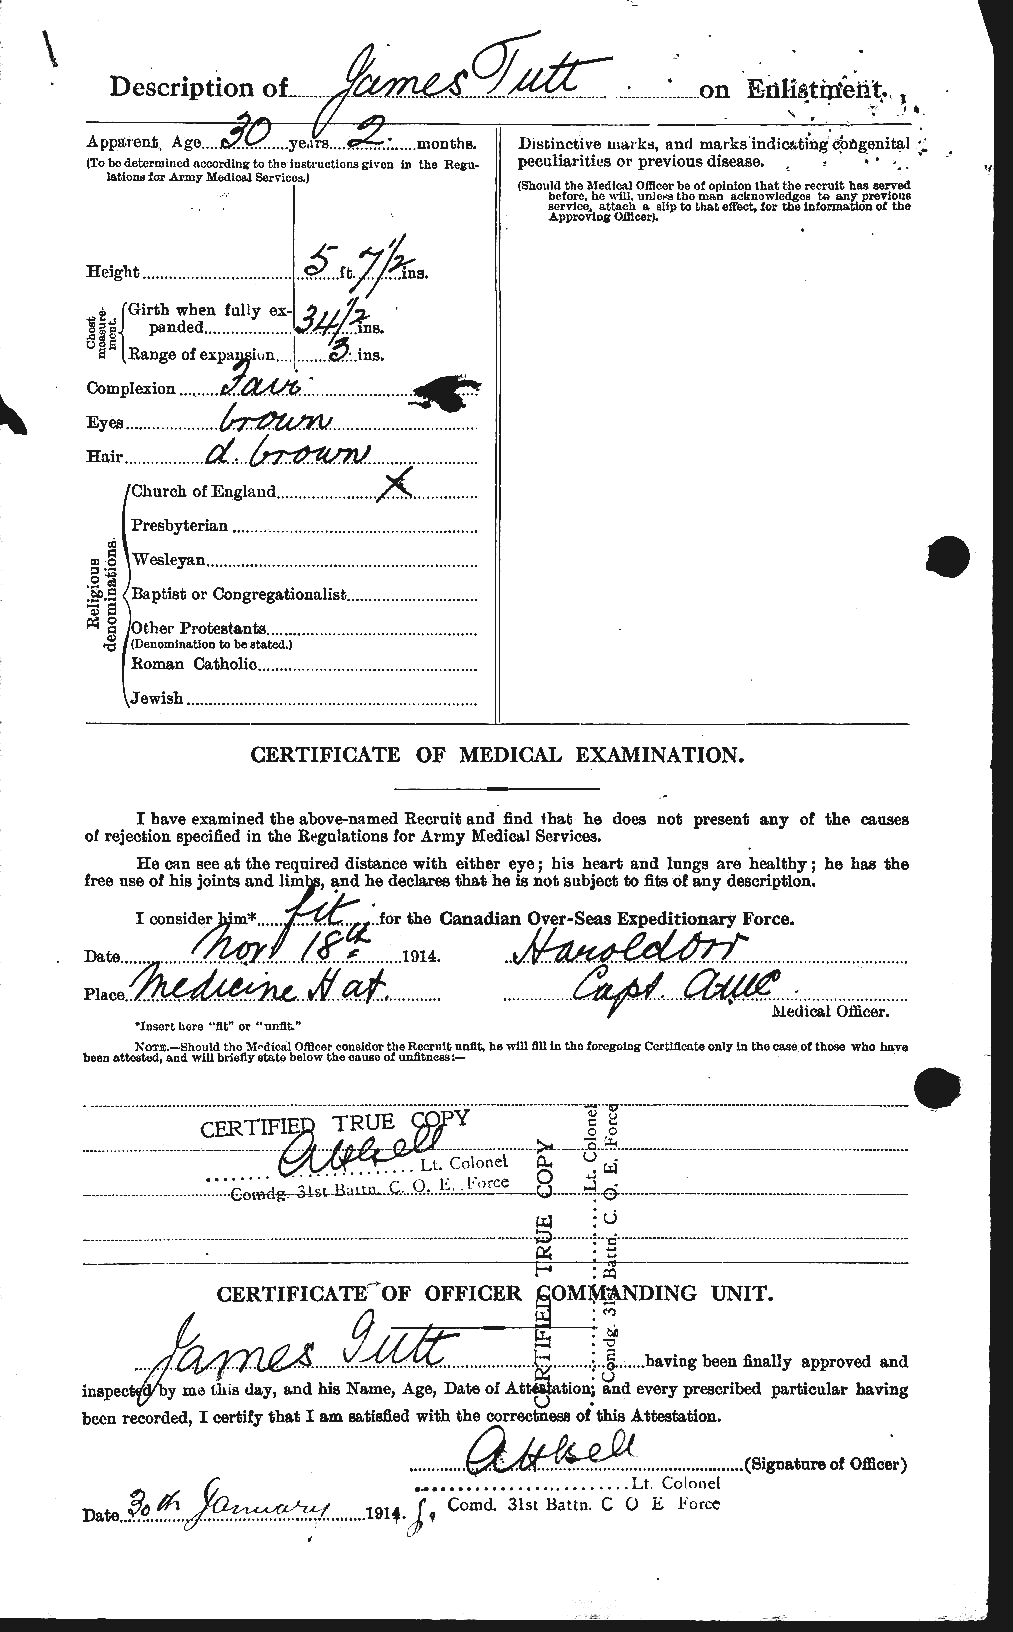 Personnel Records of the First World War - CEF 645338b